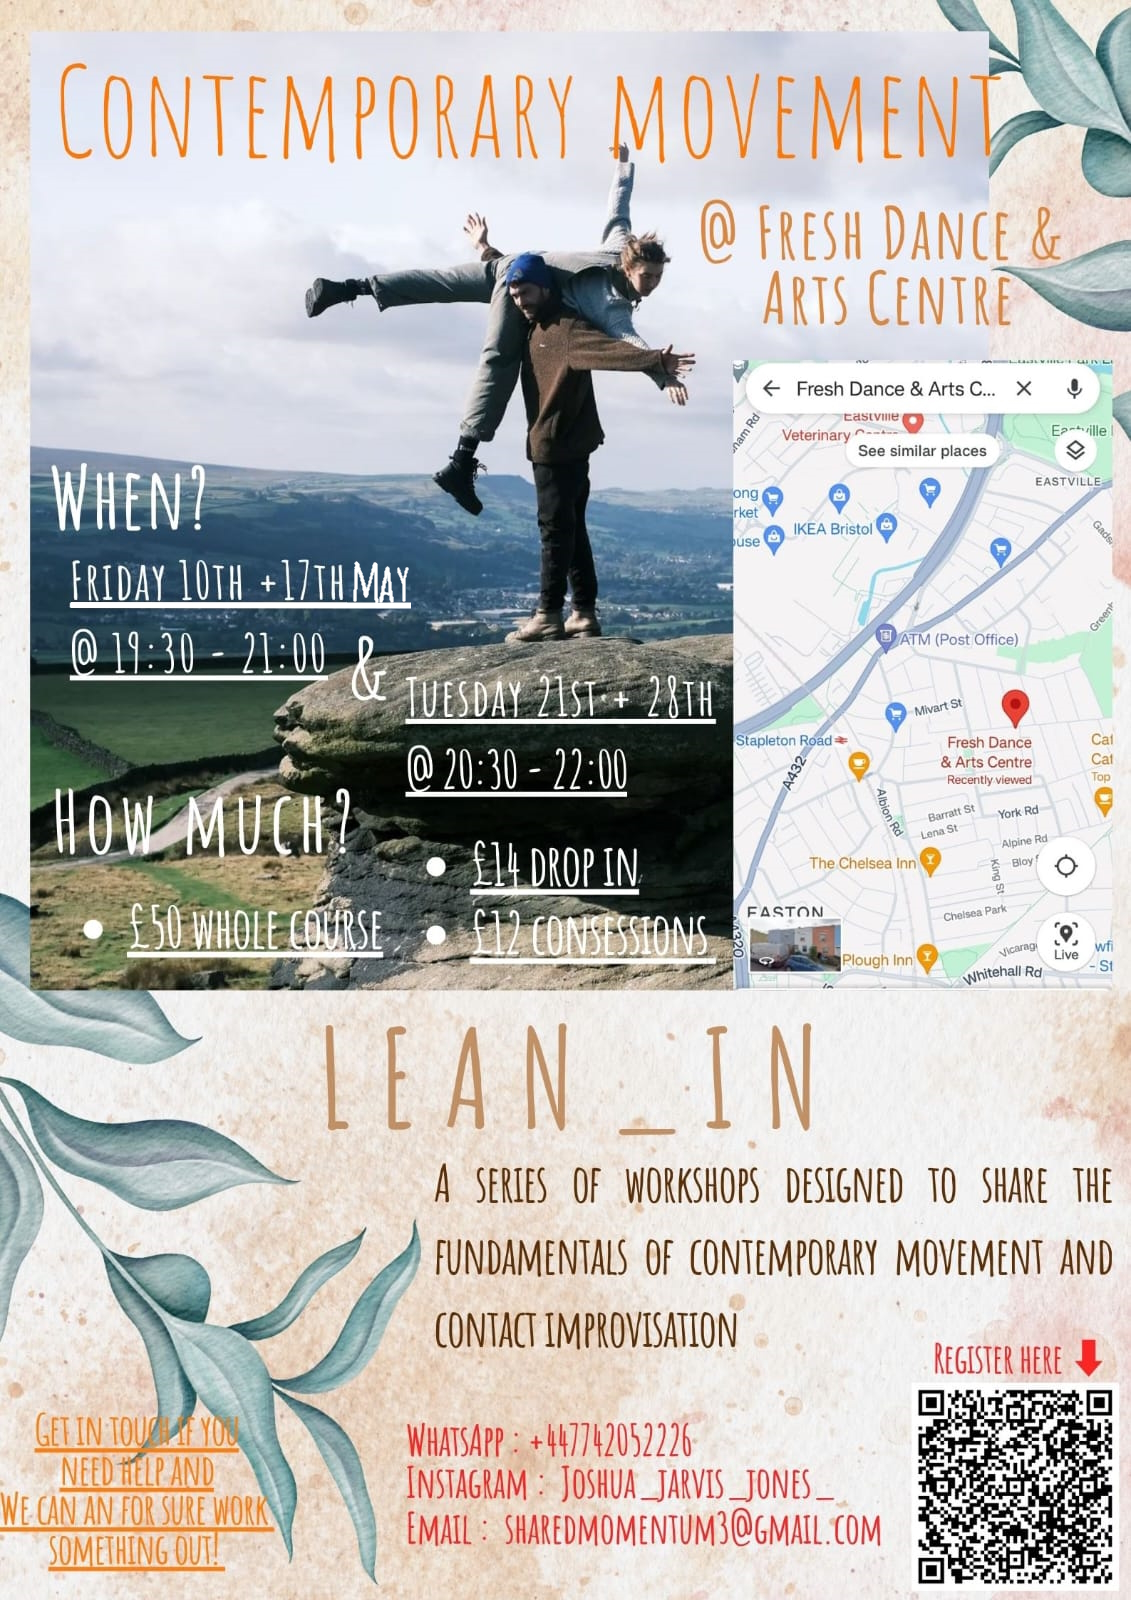 Lean_in - Contemporary movement and contact improvisation